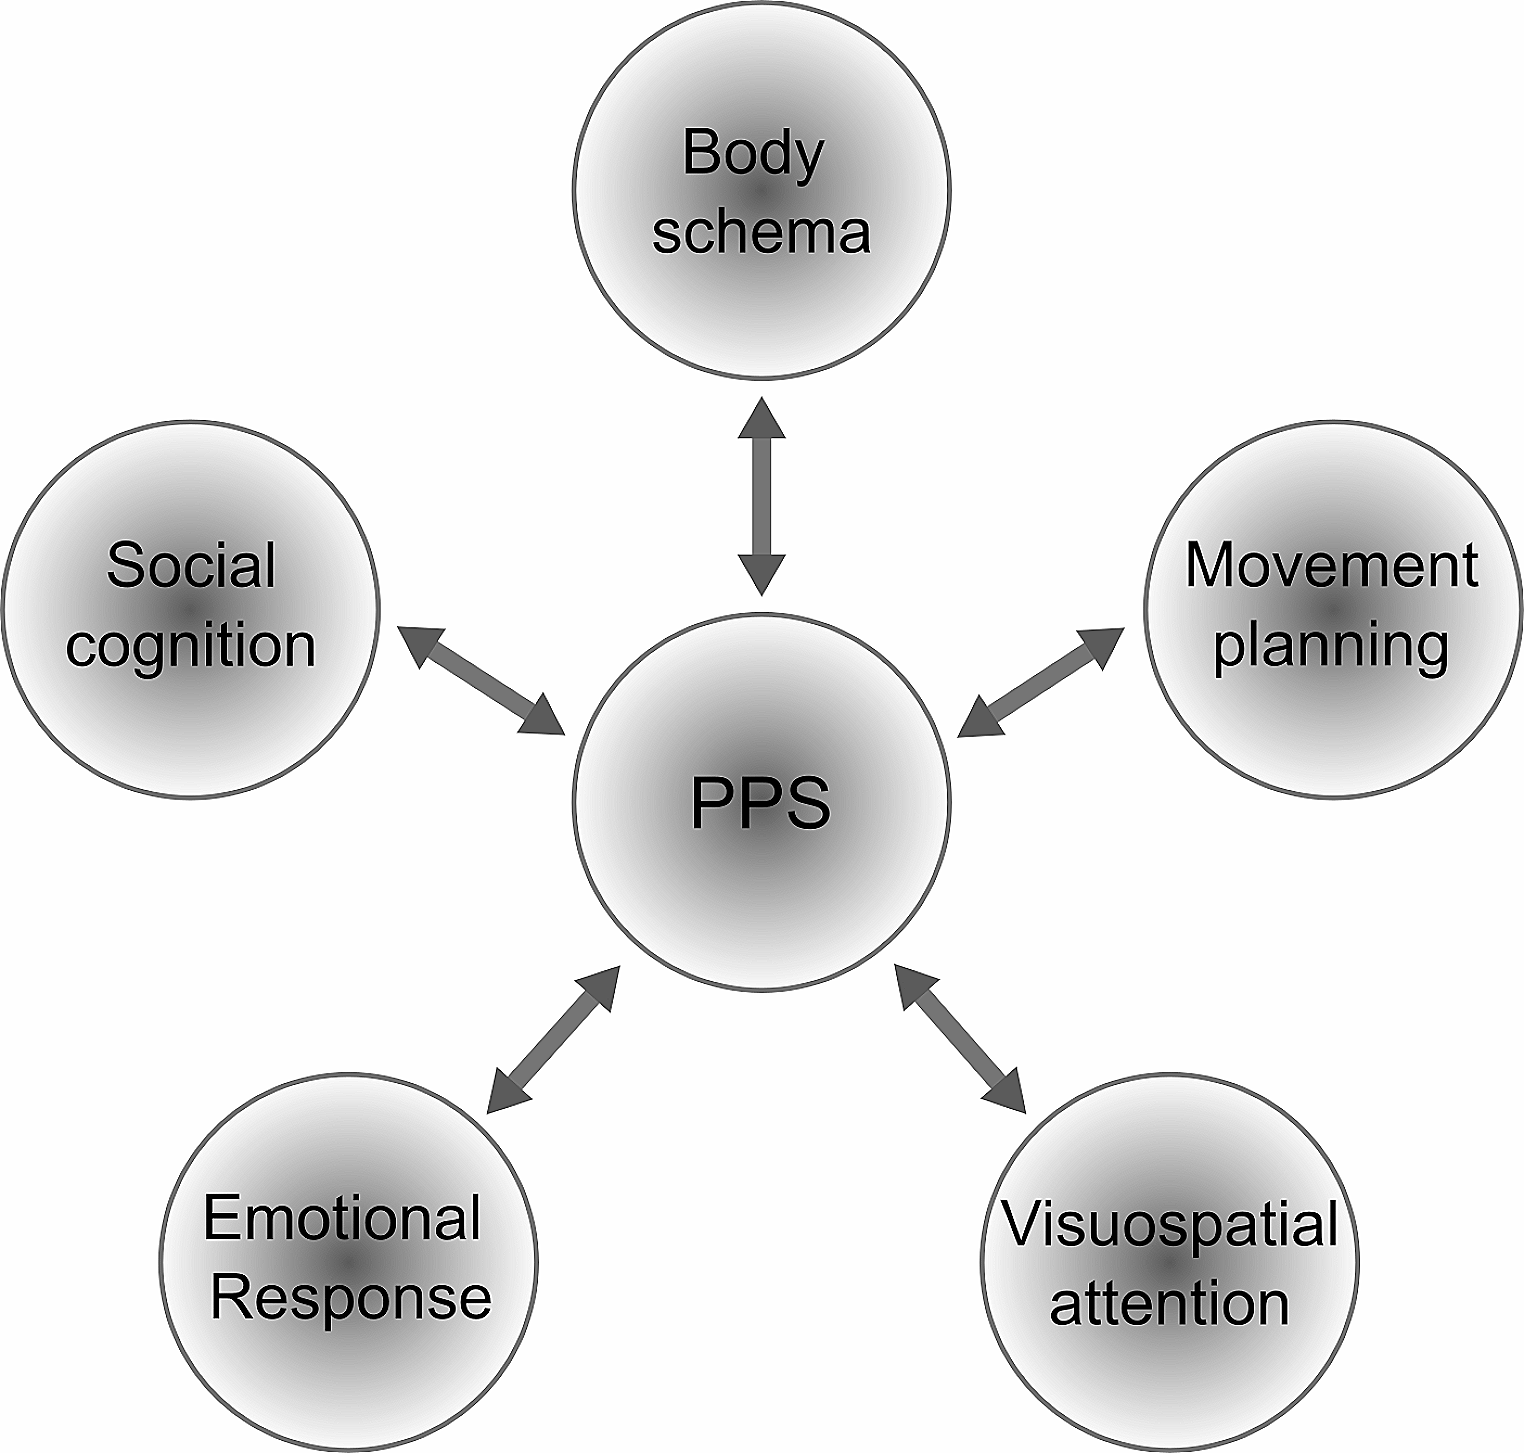 Neuroanatomical correlates of peripersonal space: bridging the gap between perception, action, emotion and social cognition